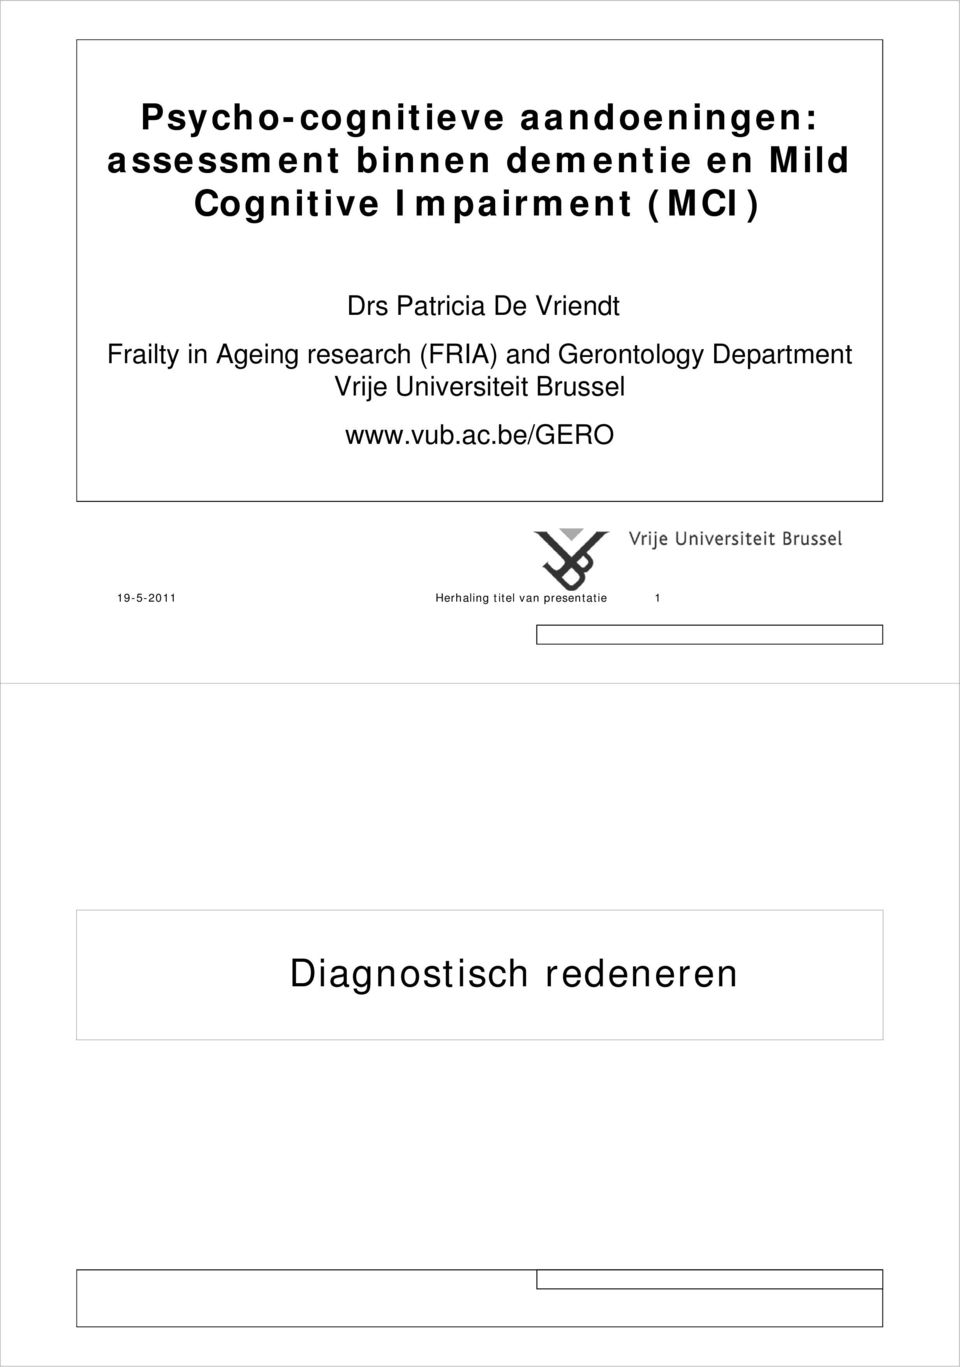 research (FRIA) and Gerontology Department Vrije Universiteit Brussel